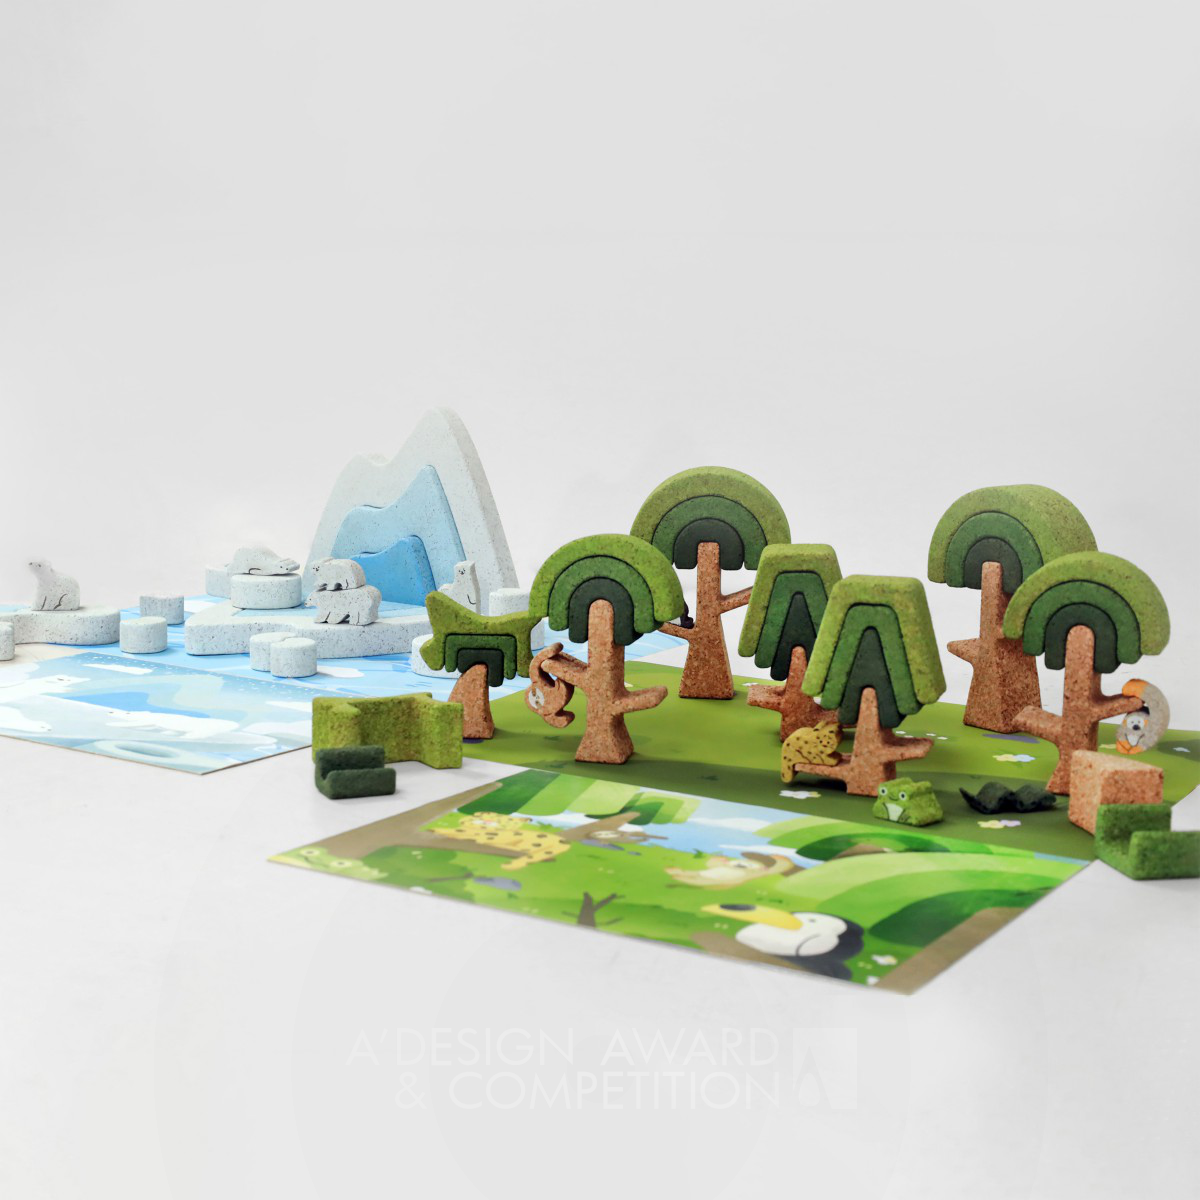 ChungSheng Chen wins Bronze at the prestigious A' Toys, Games and Hobby Products Design Award with Habitat Educational Toy Brick.